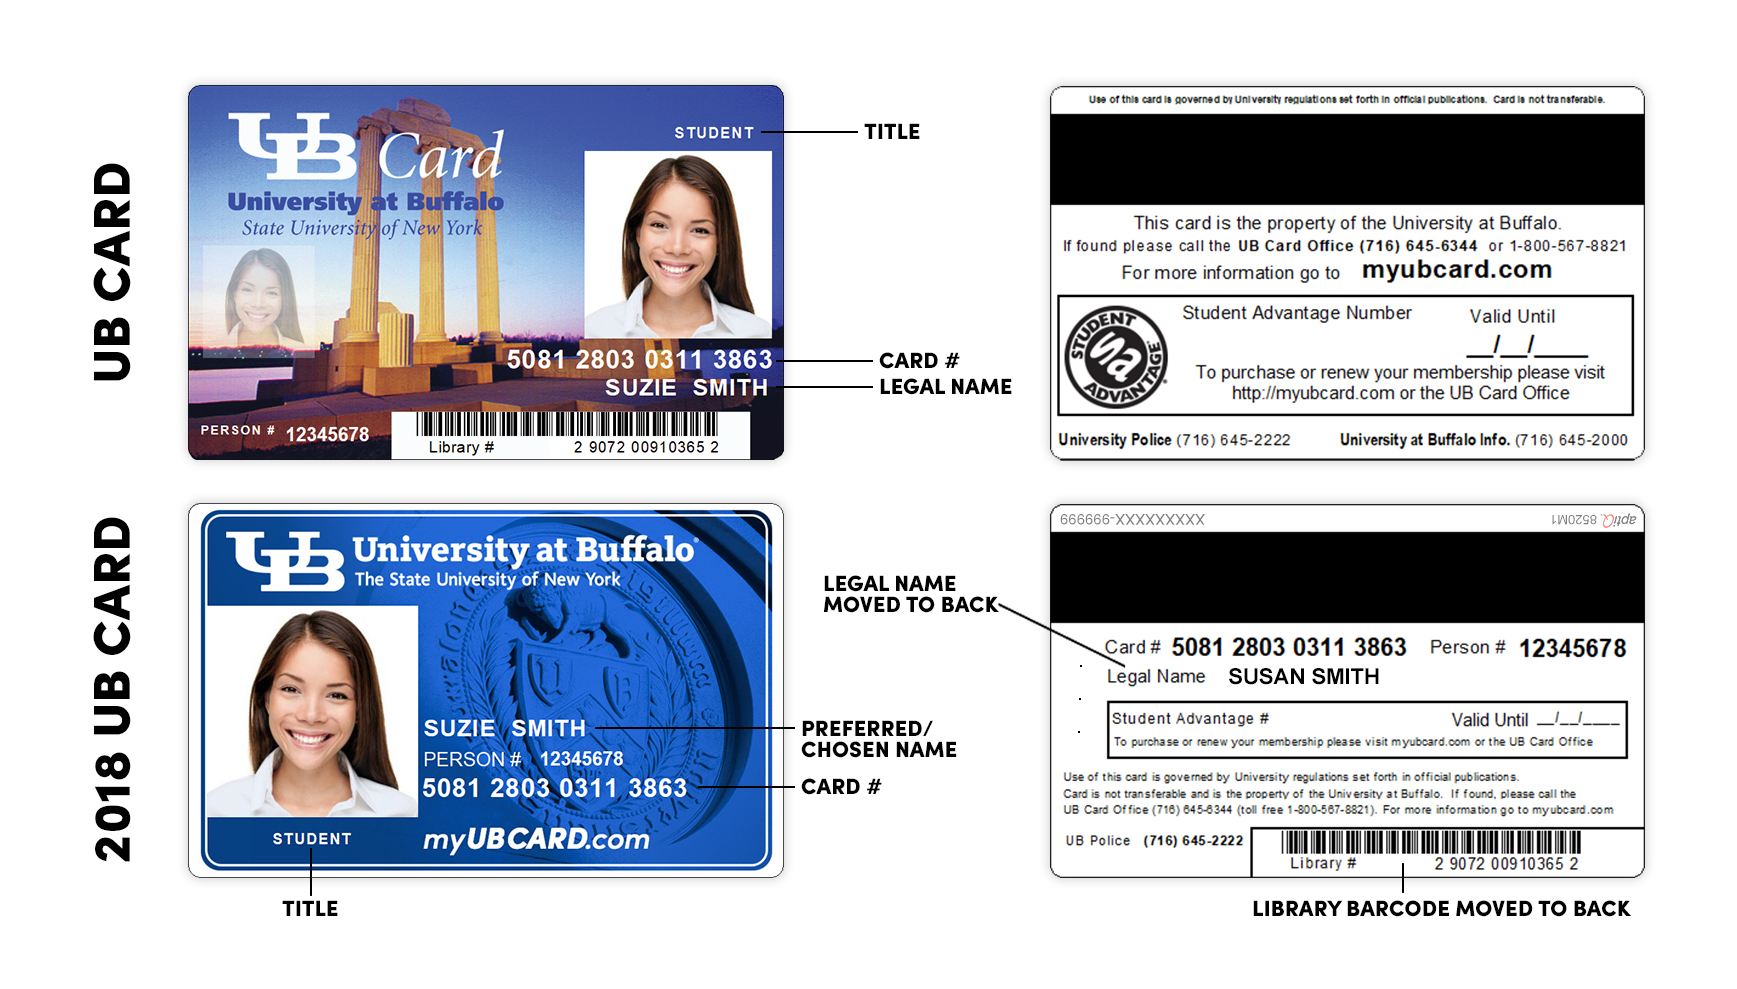 Legal name moved to back, preferred/chosen name on the front, library card barcode moved to the back.